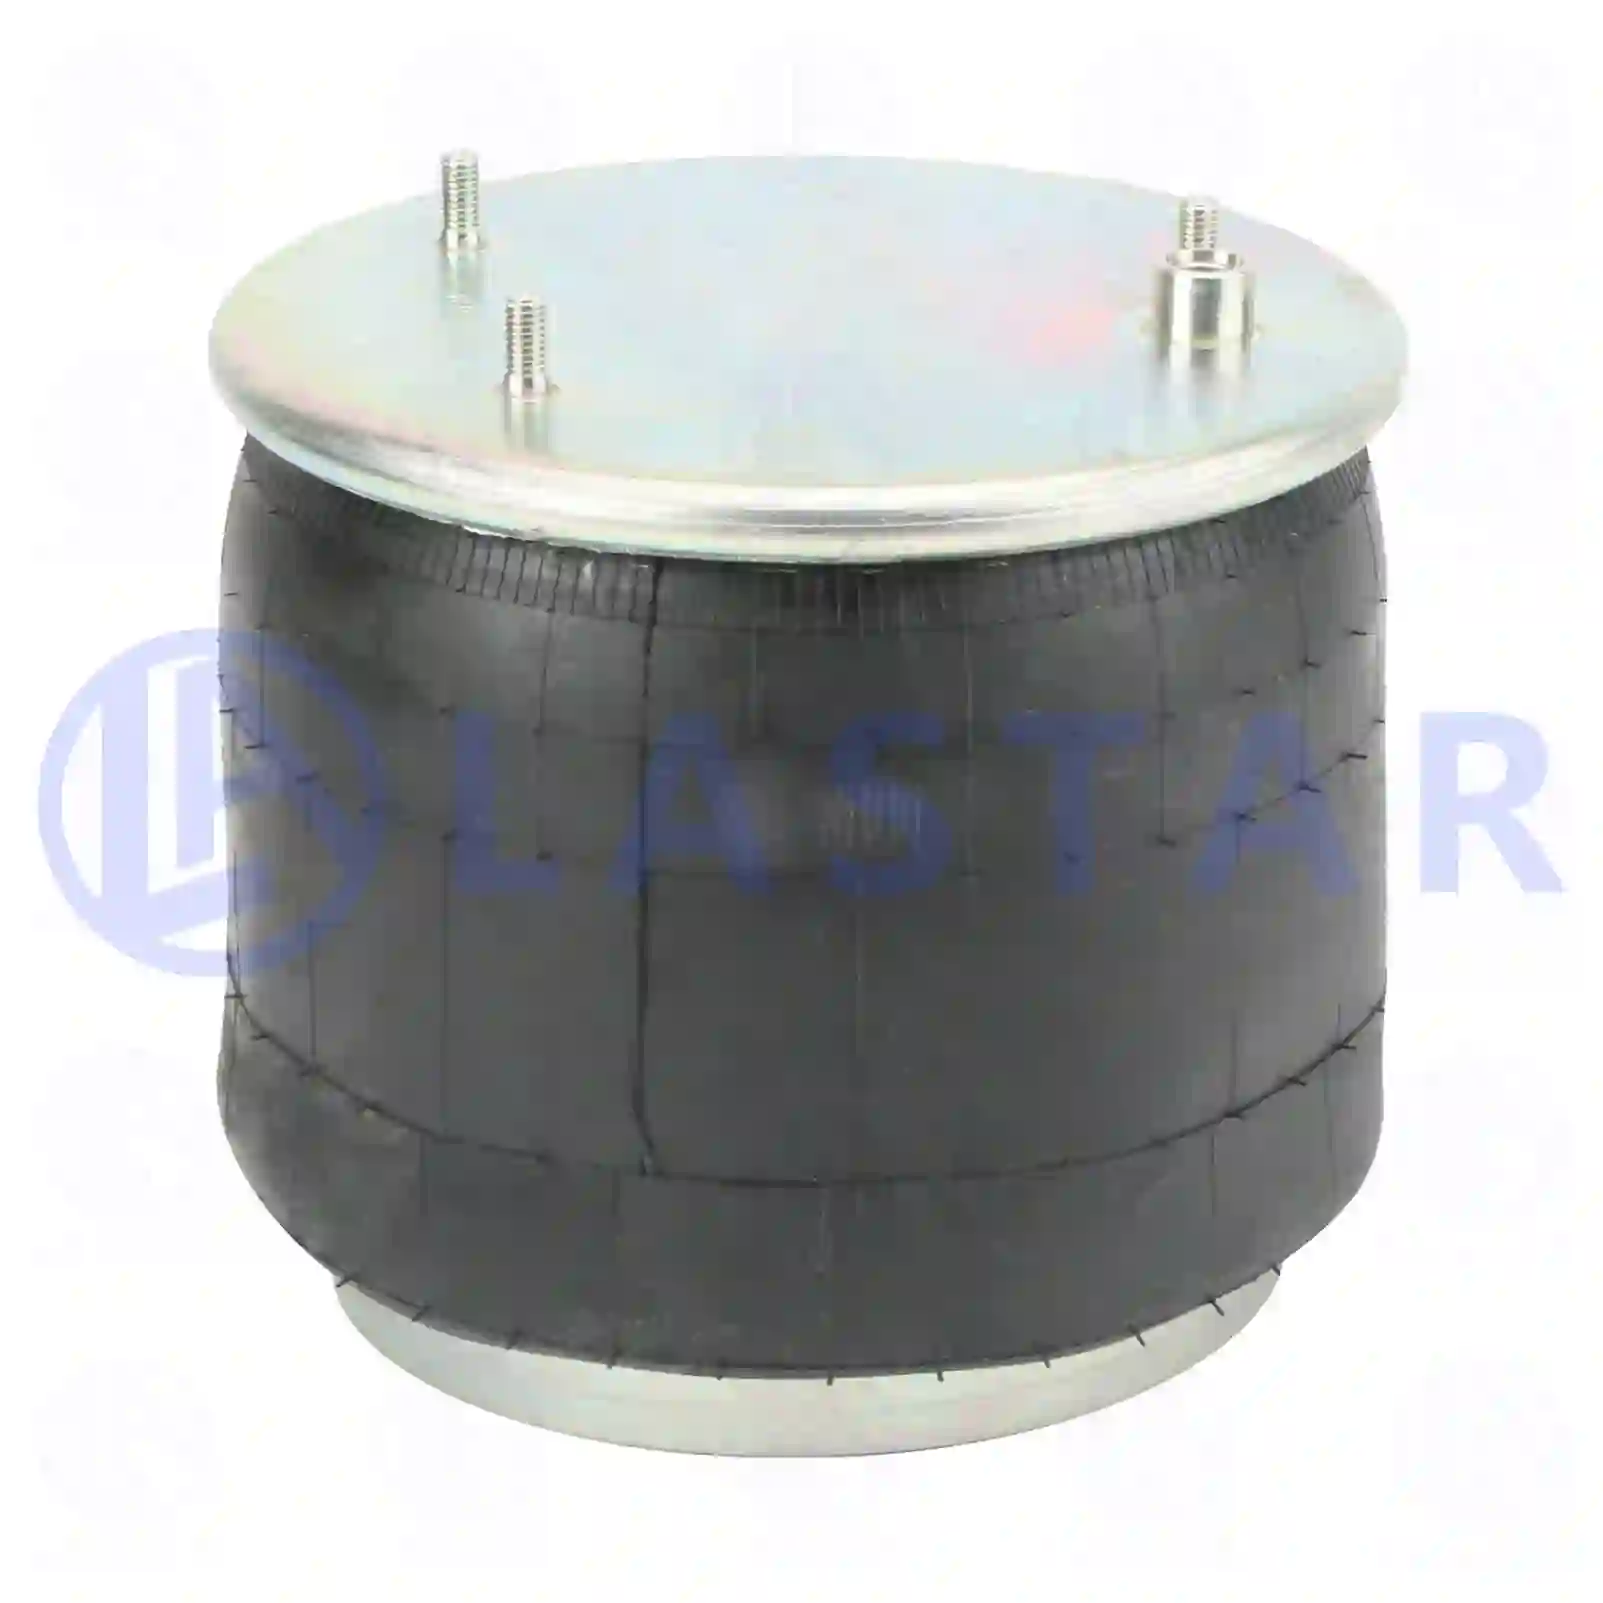 Air spring, with steel piston, 77728502, 1266381, 1697679, ZG40780-0008 ||  77728502 Lastar Spare Part | Truck Spare Parts, Auotomotive Spare Parts Air spring, with steel piston, 77728502, 1266381, 1697679, ZG40780-0008 ||  77728502 Lastar Spare Part | Truck Spare Parts, Auotomotive Spare Parts